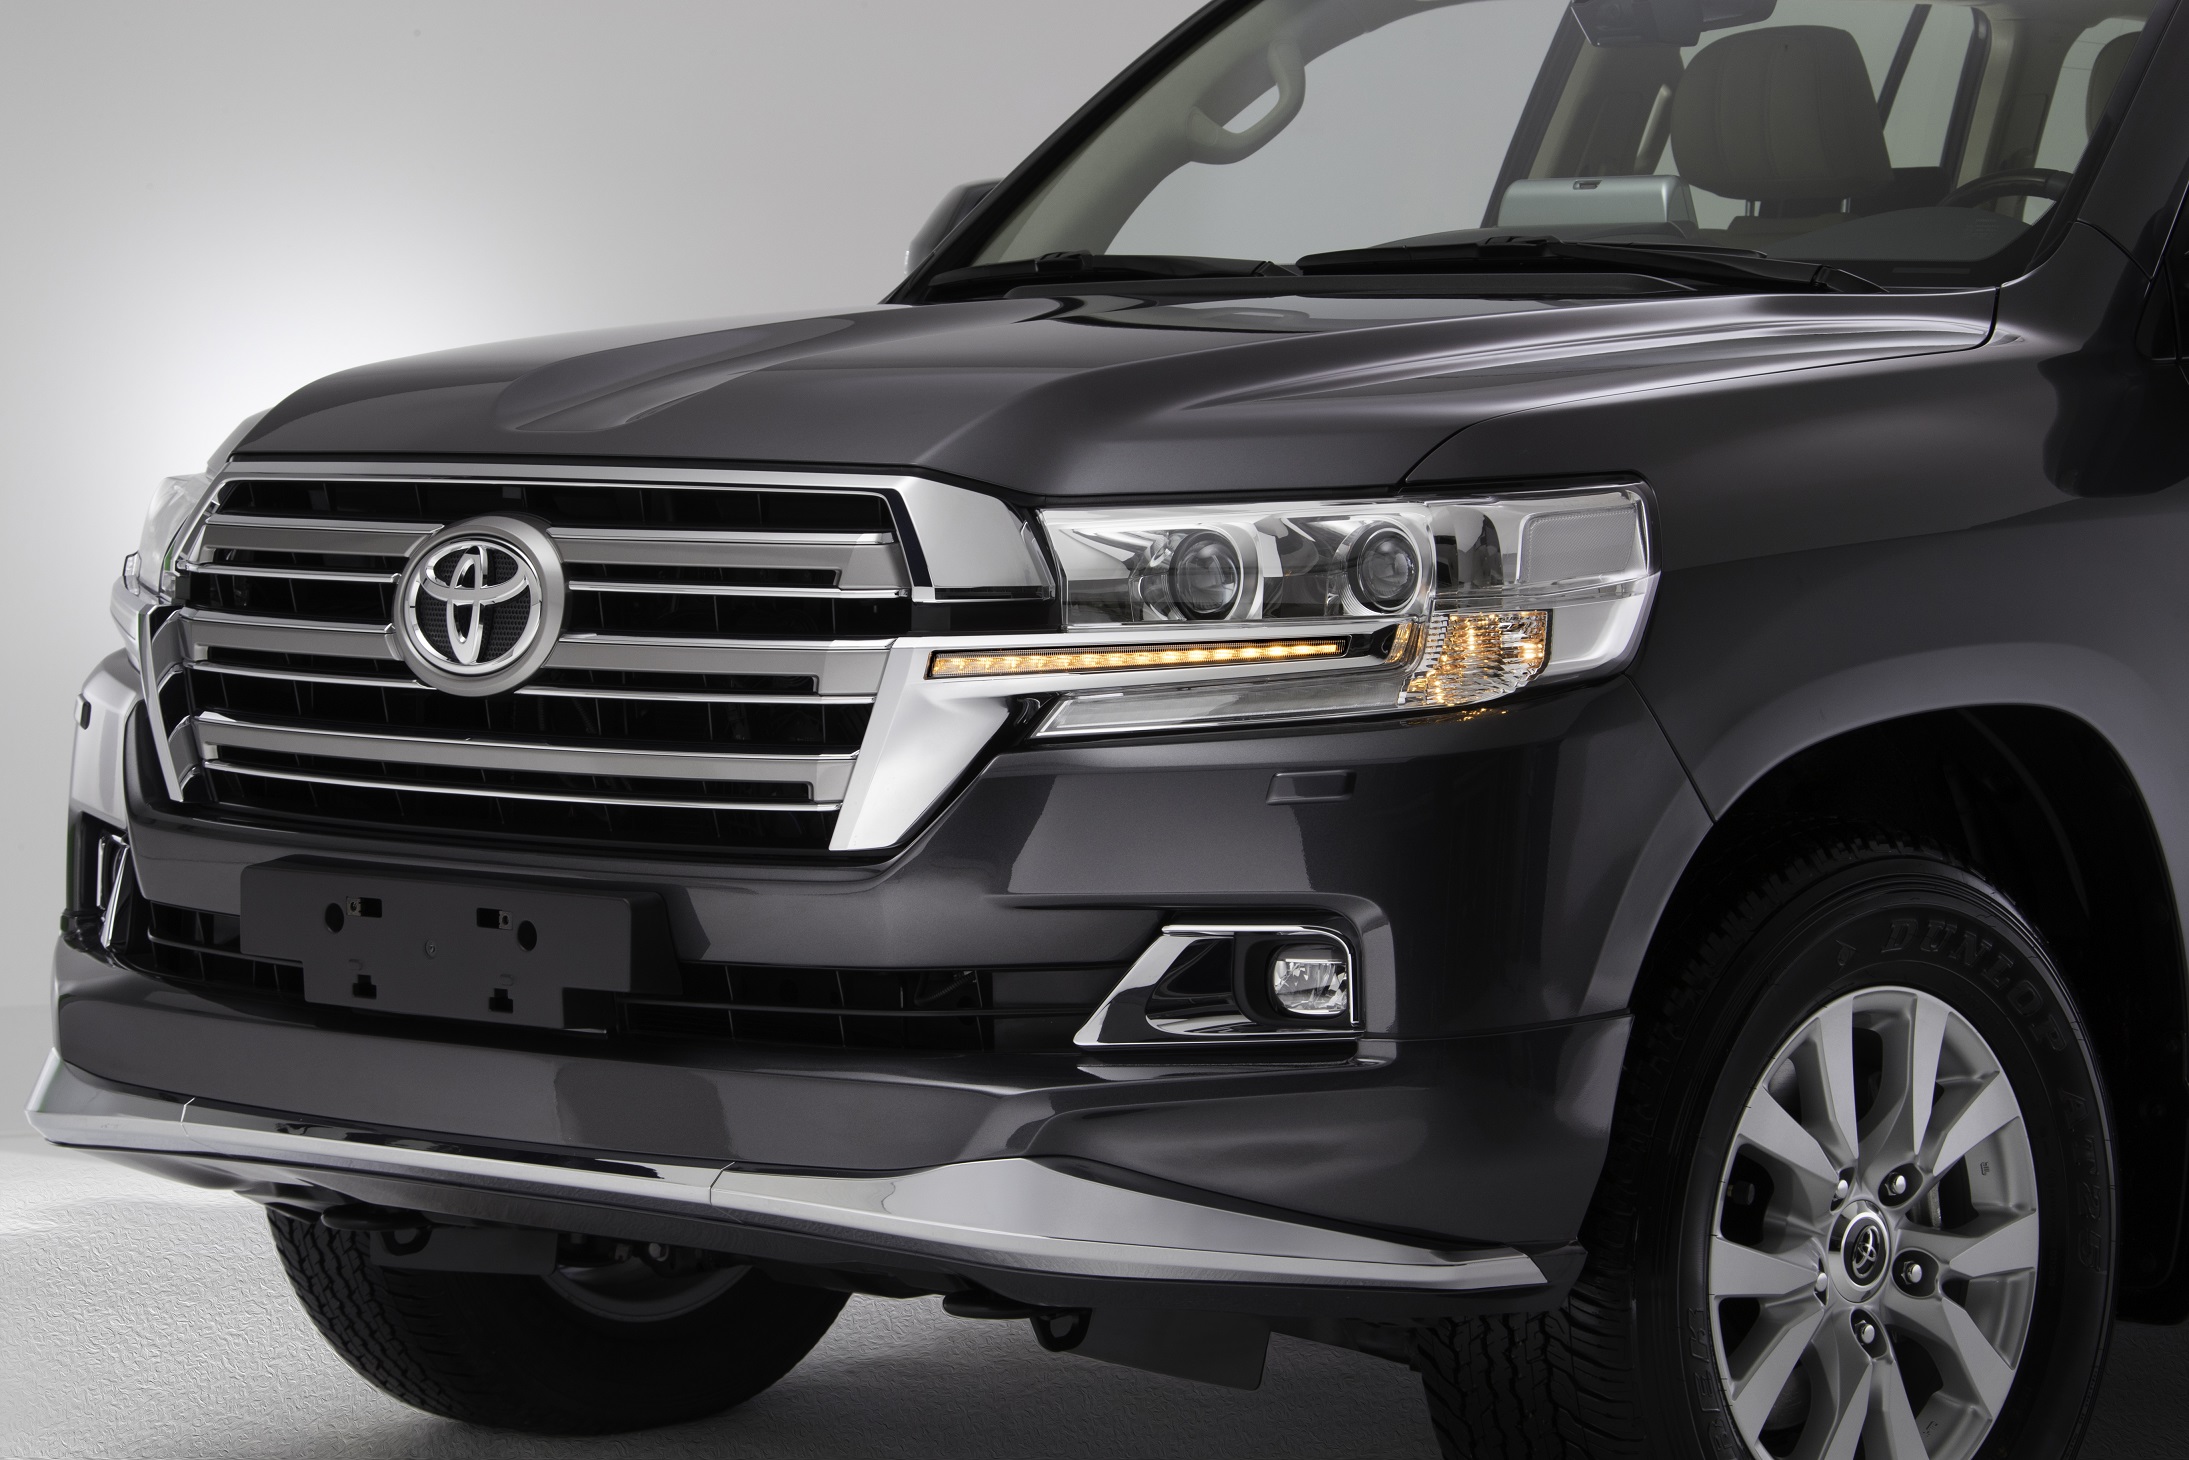 Toyota Land Cruiser Continues to Maintain Leadership Position with 2017 Model